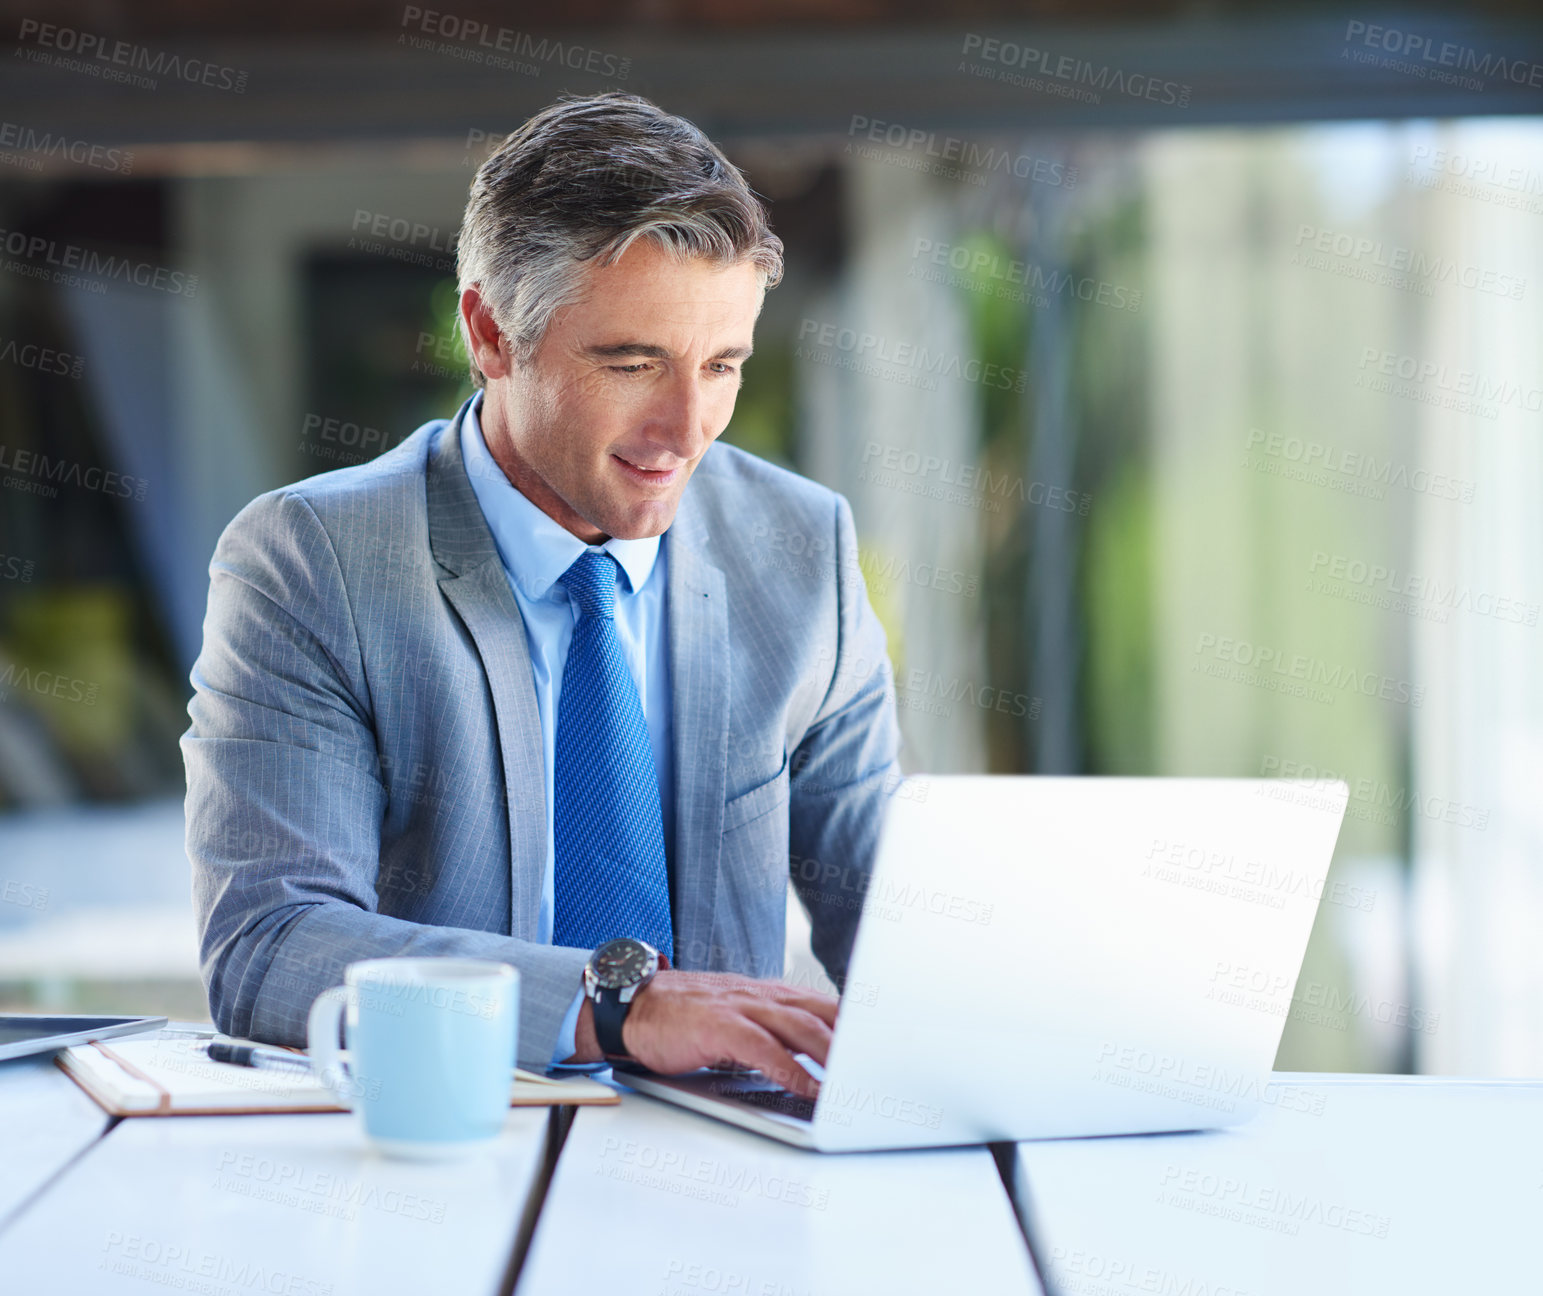 Buy stock photo Shot of a mature businessman working on a laptop